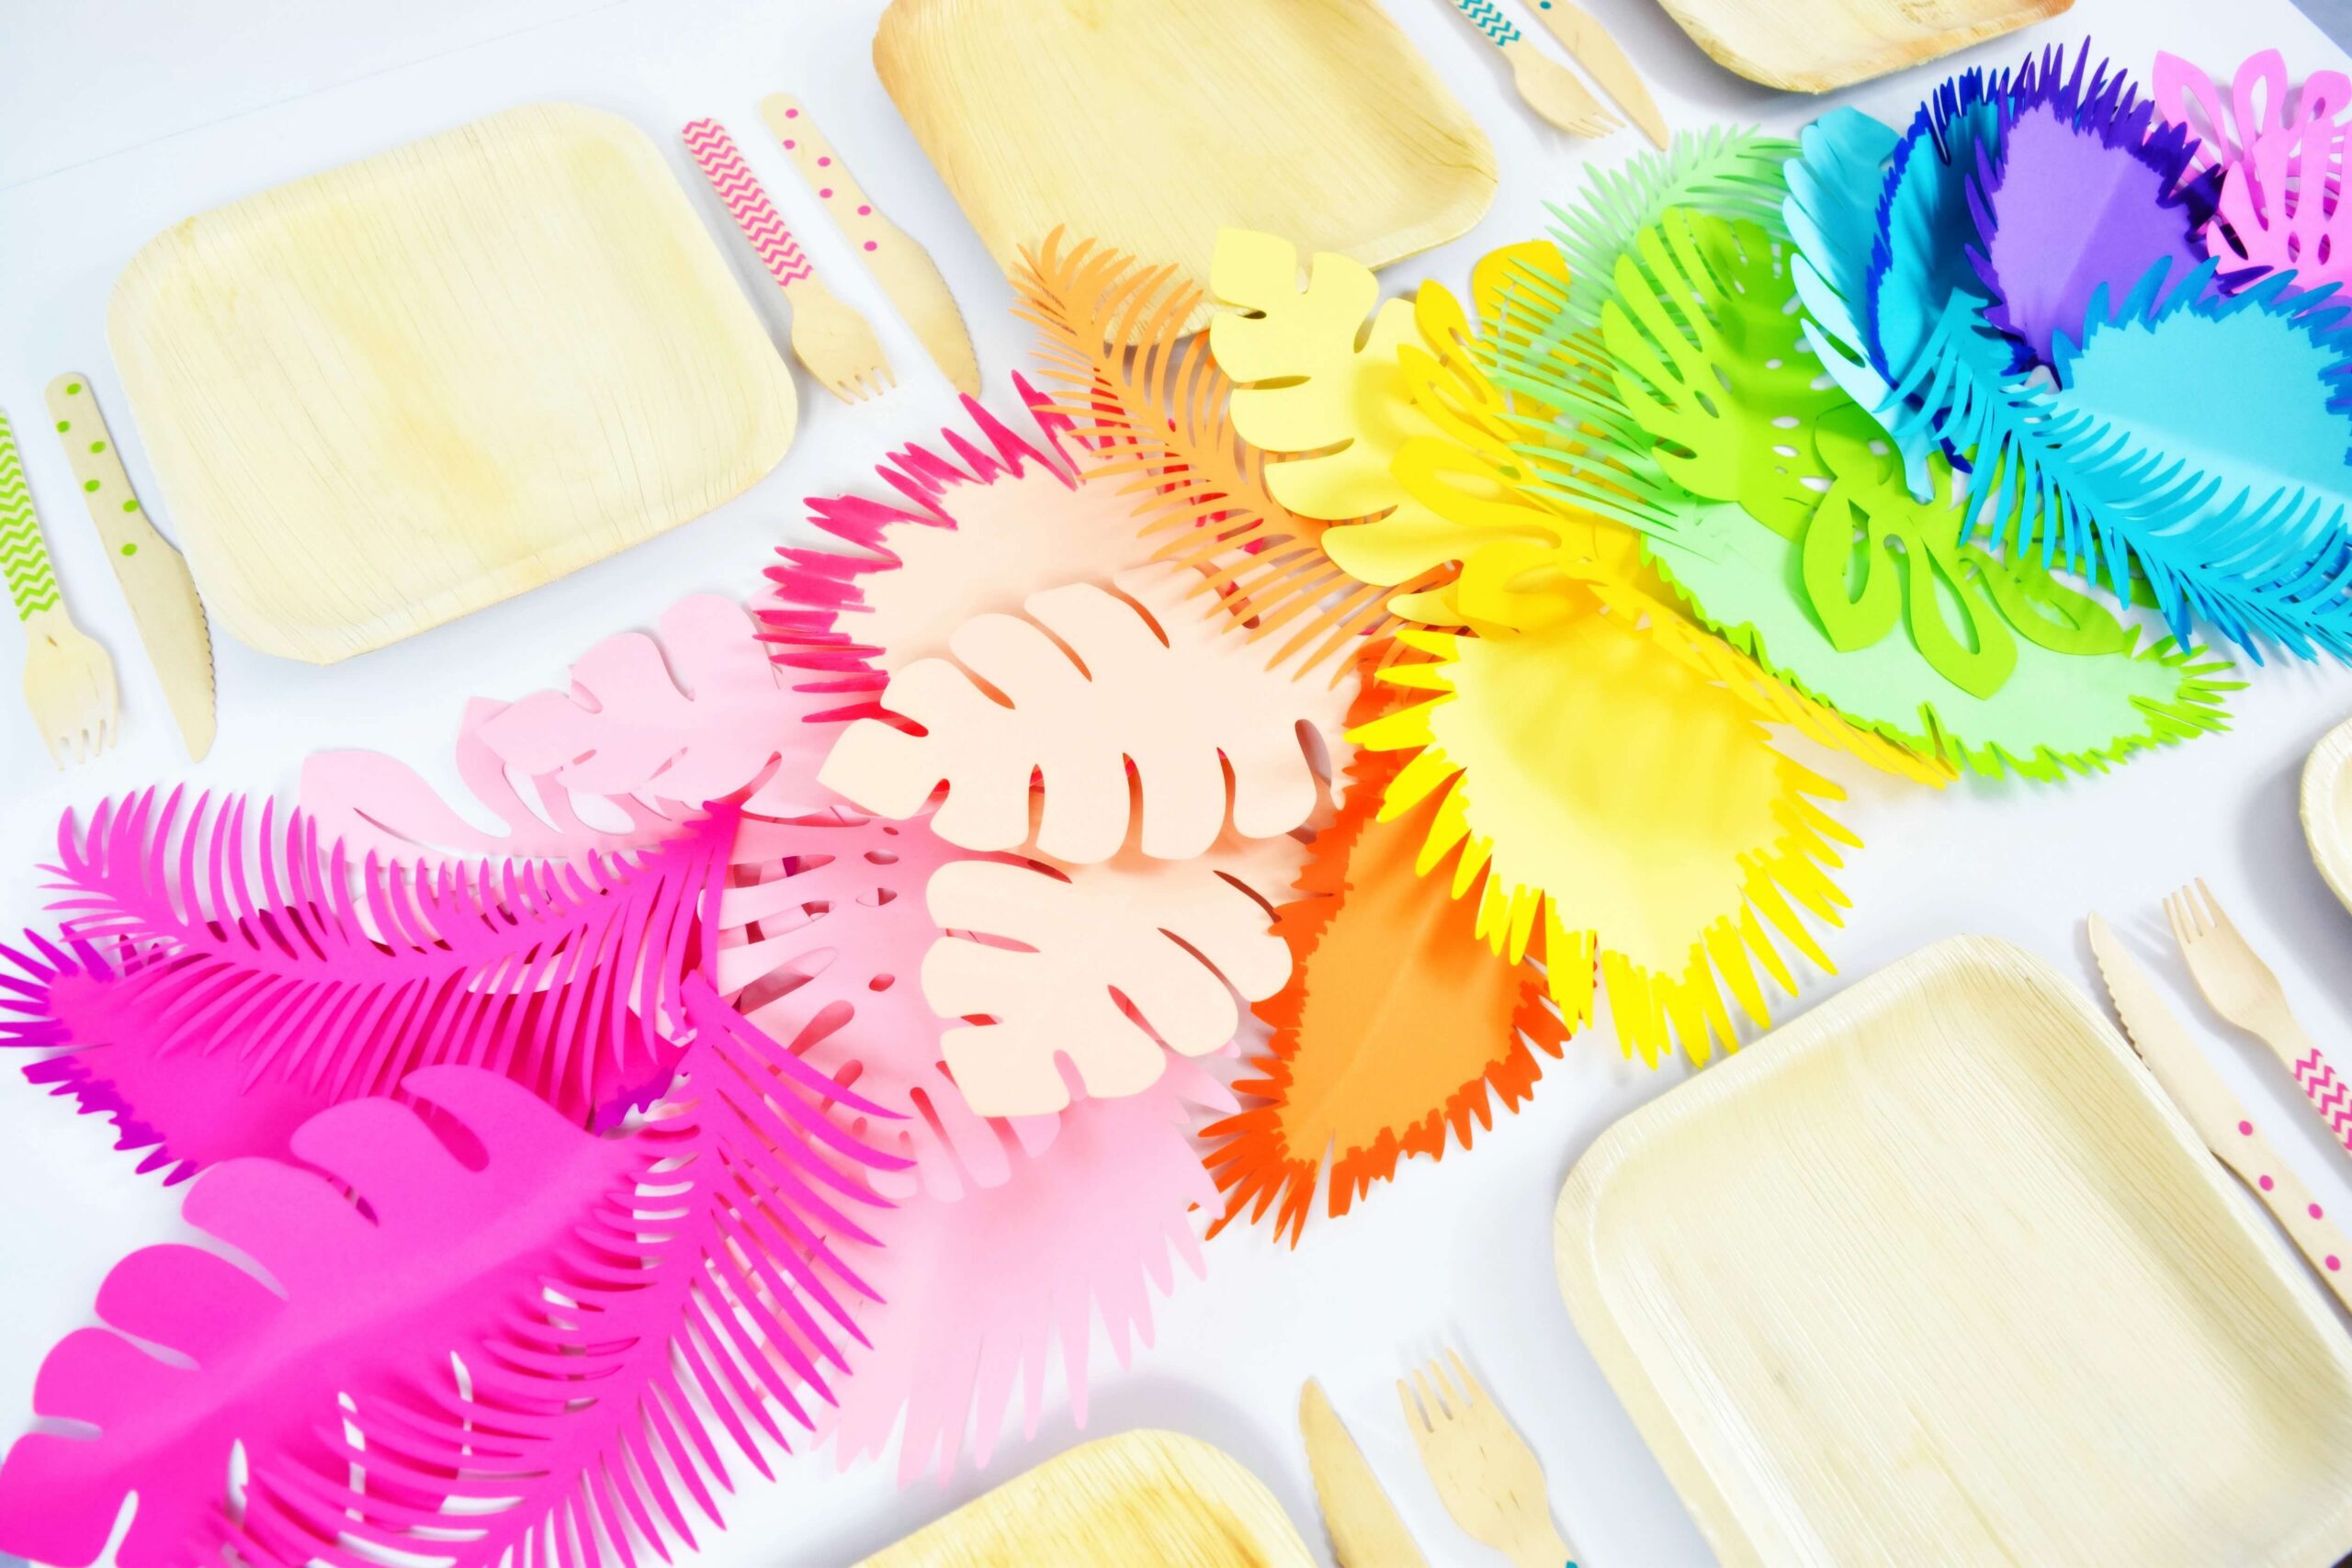 A tropical rainbow colored centerpiece runs down a table set with bamboo plate place settings. The table runner us made up of large tropical style leaves.